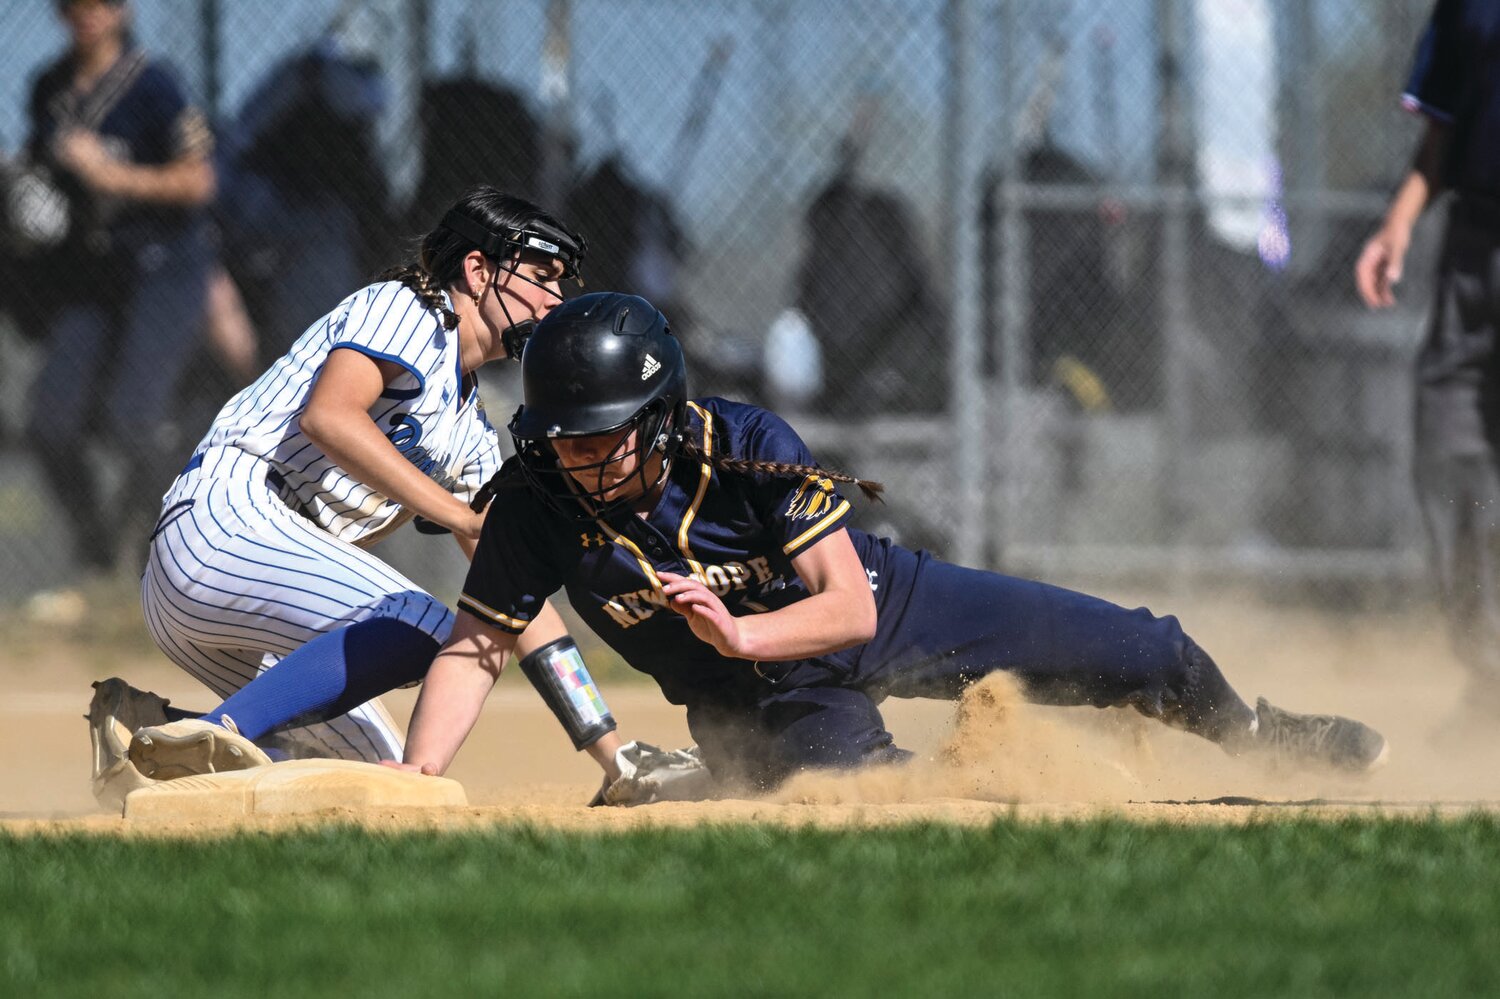 New Hope-Solebury’s Emily Wilson avoids a tag from Quakertown’s Kira Jefferson and hurries back to second after an infield out.